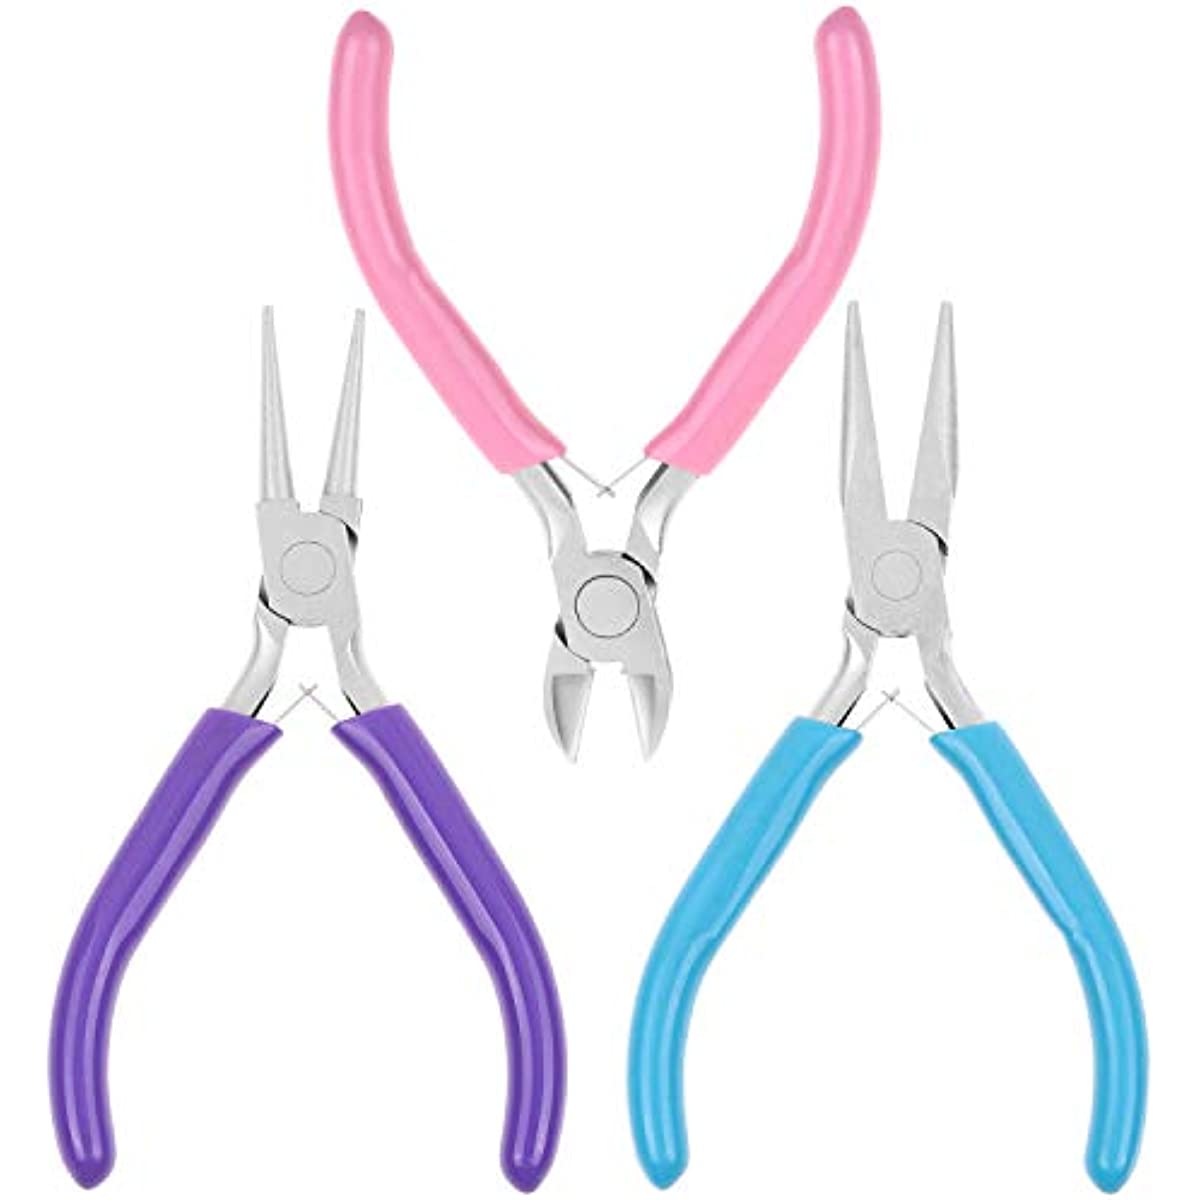 Needle Nose Pliers For Jewelry Making, Long Nose Craft Pliers, Needlenose